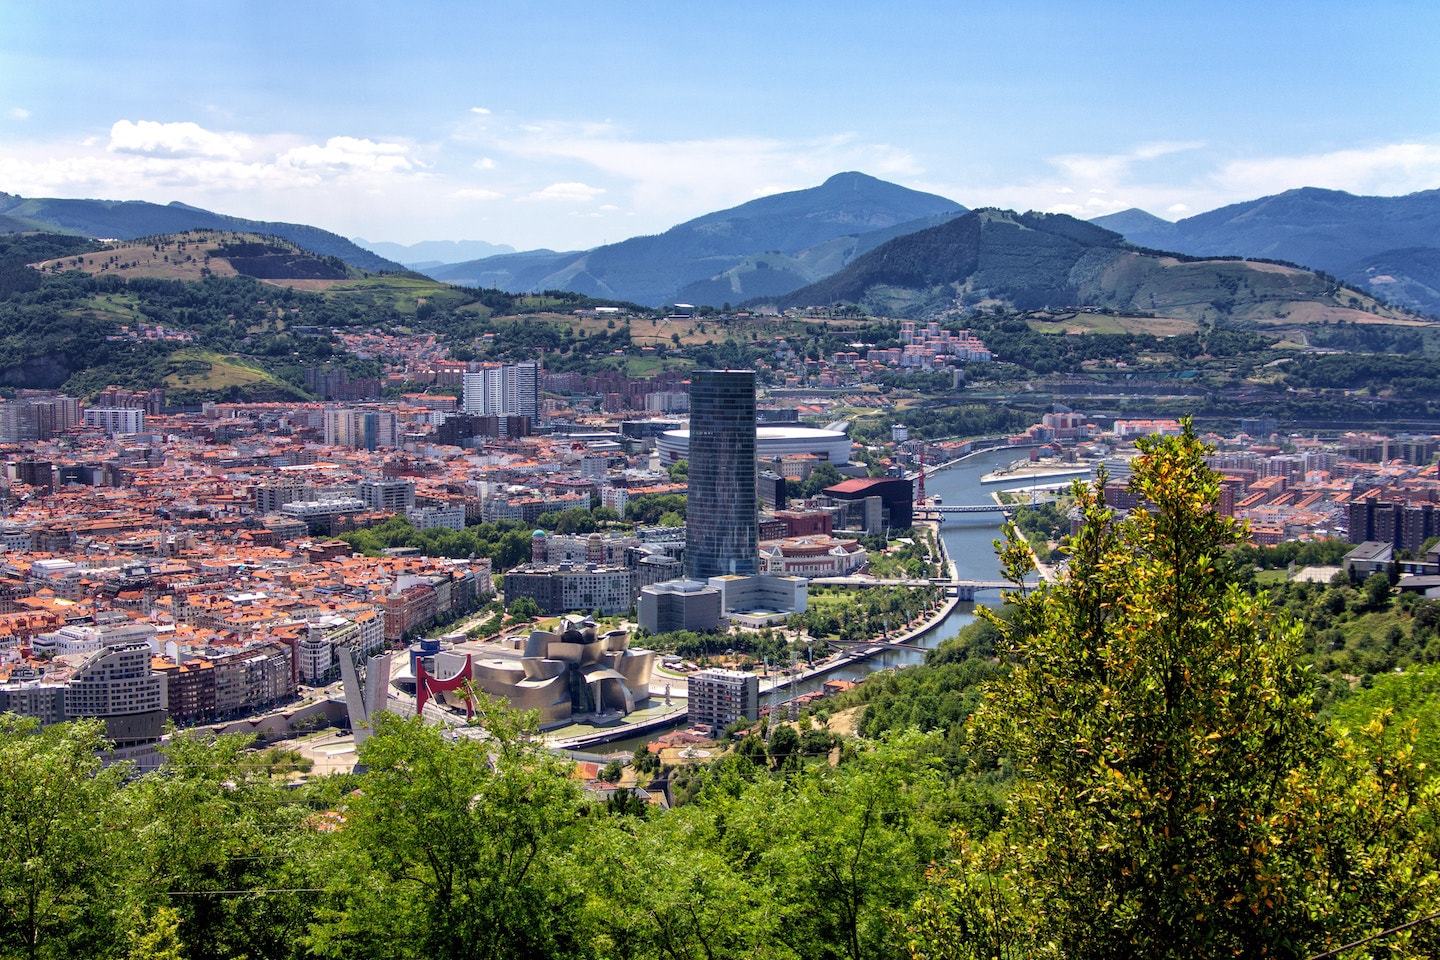 Aerial view of bilbao spain with buildings, trees and mountains